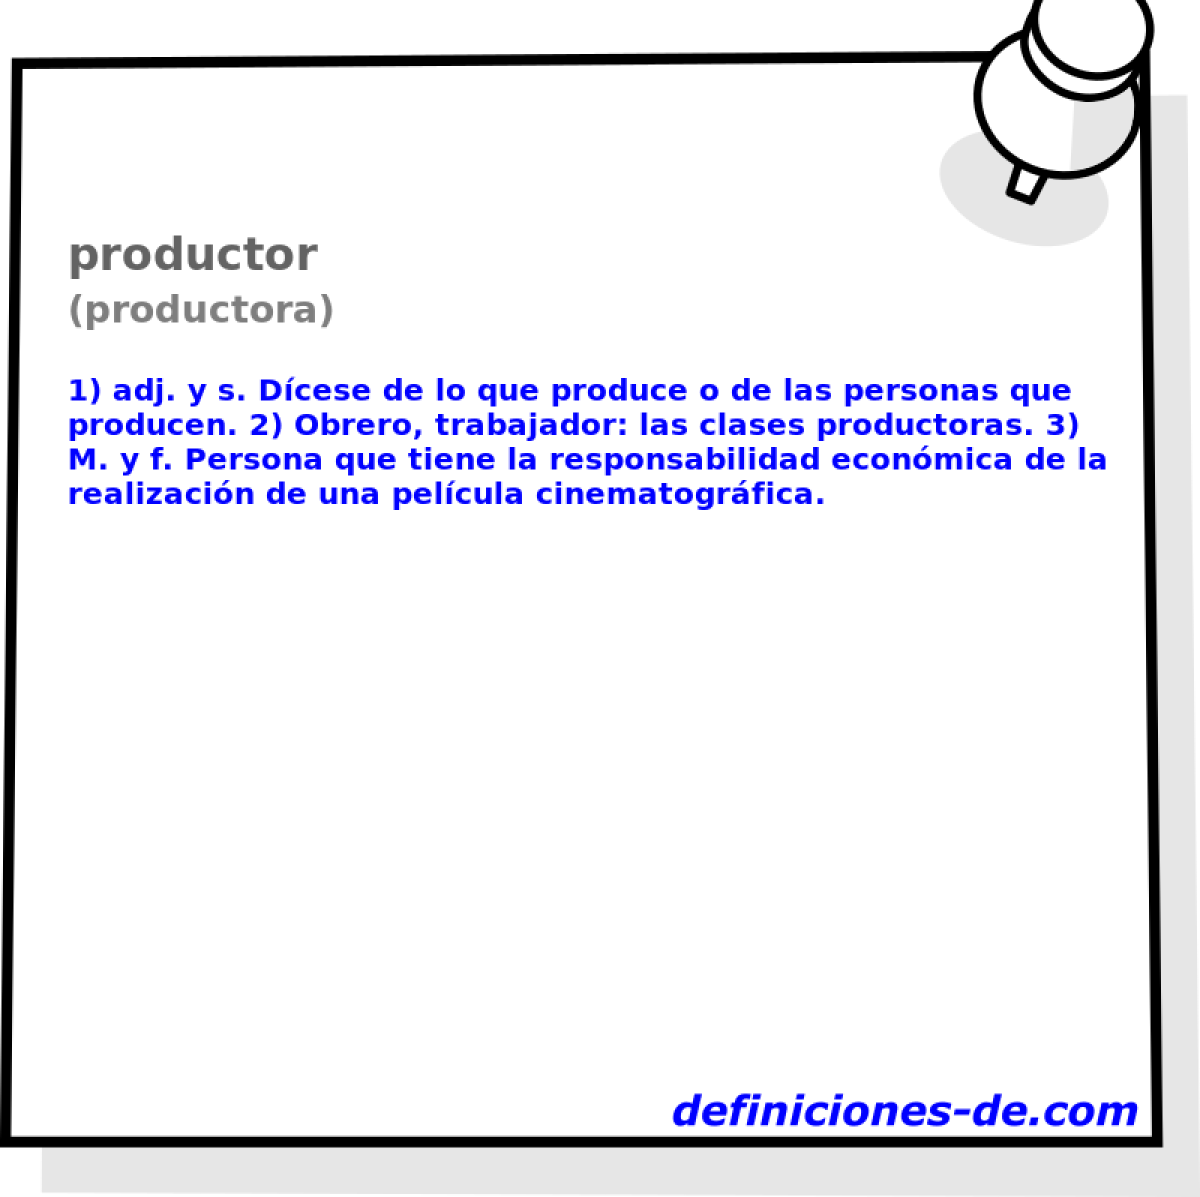 productor (productora)